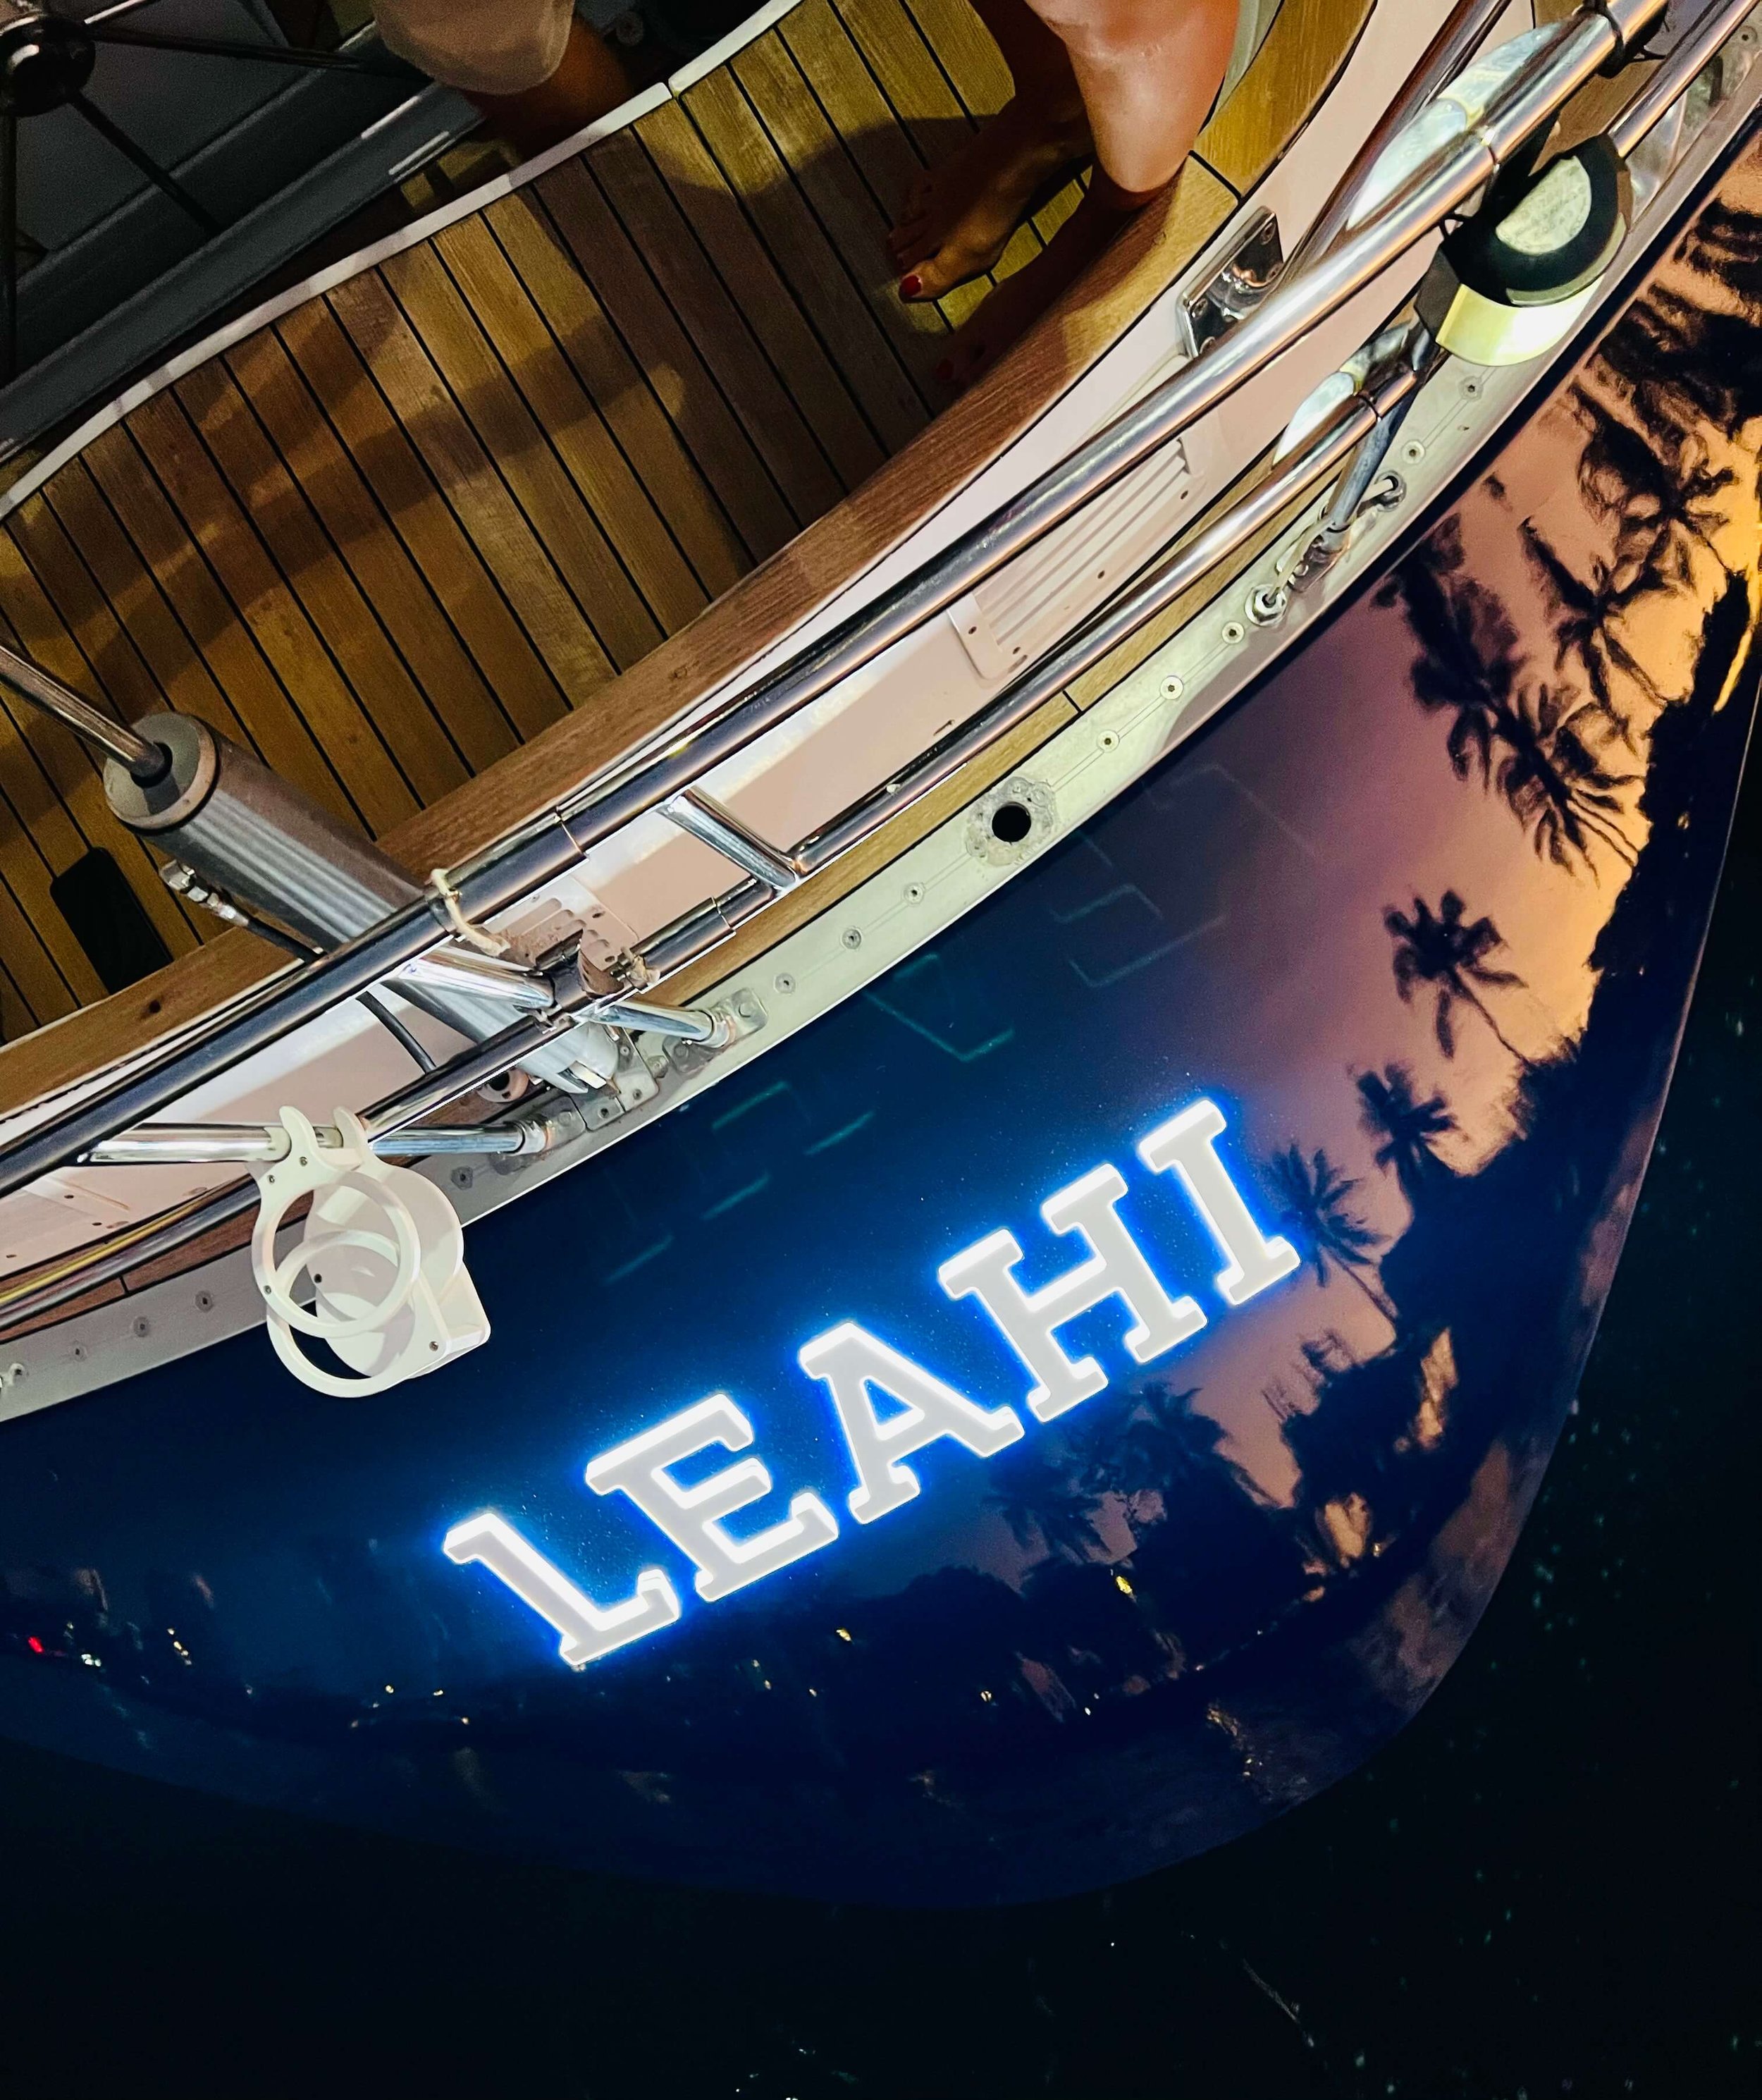  The led name graphics on the stern of the 59’ Swan sailing yacht Leahi 